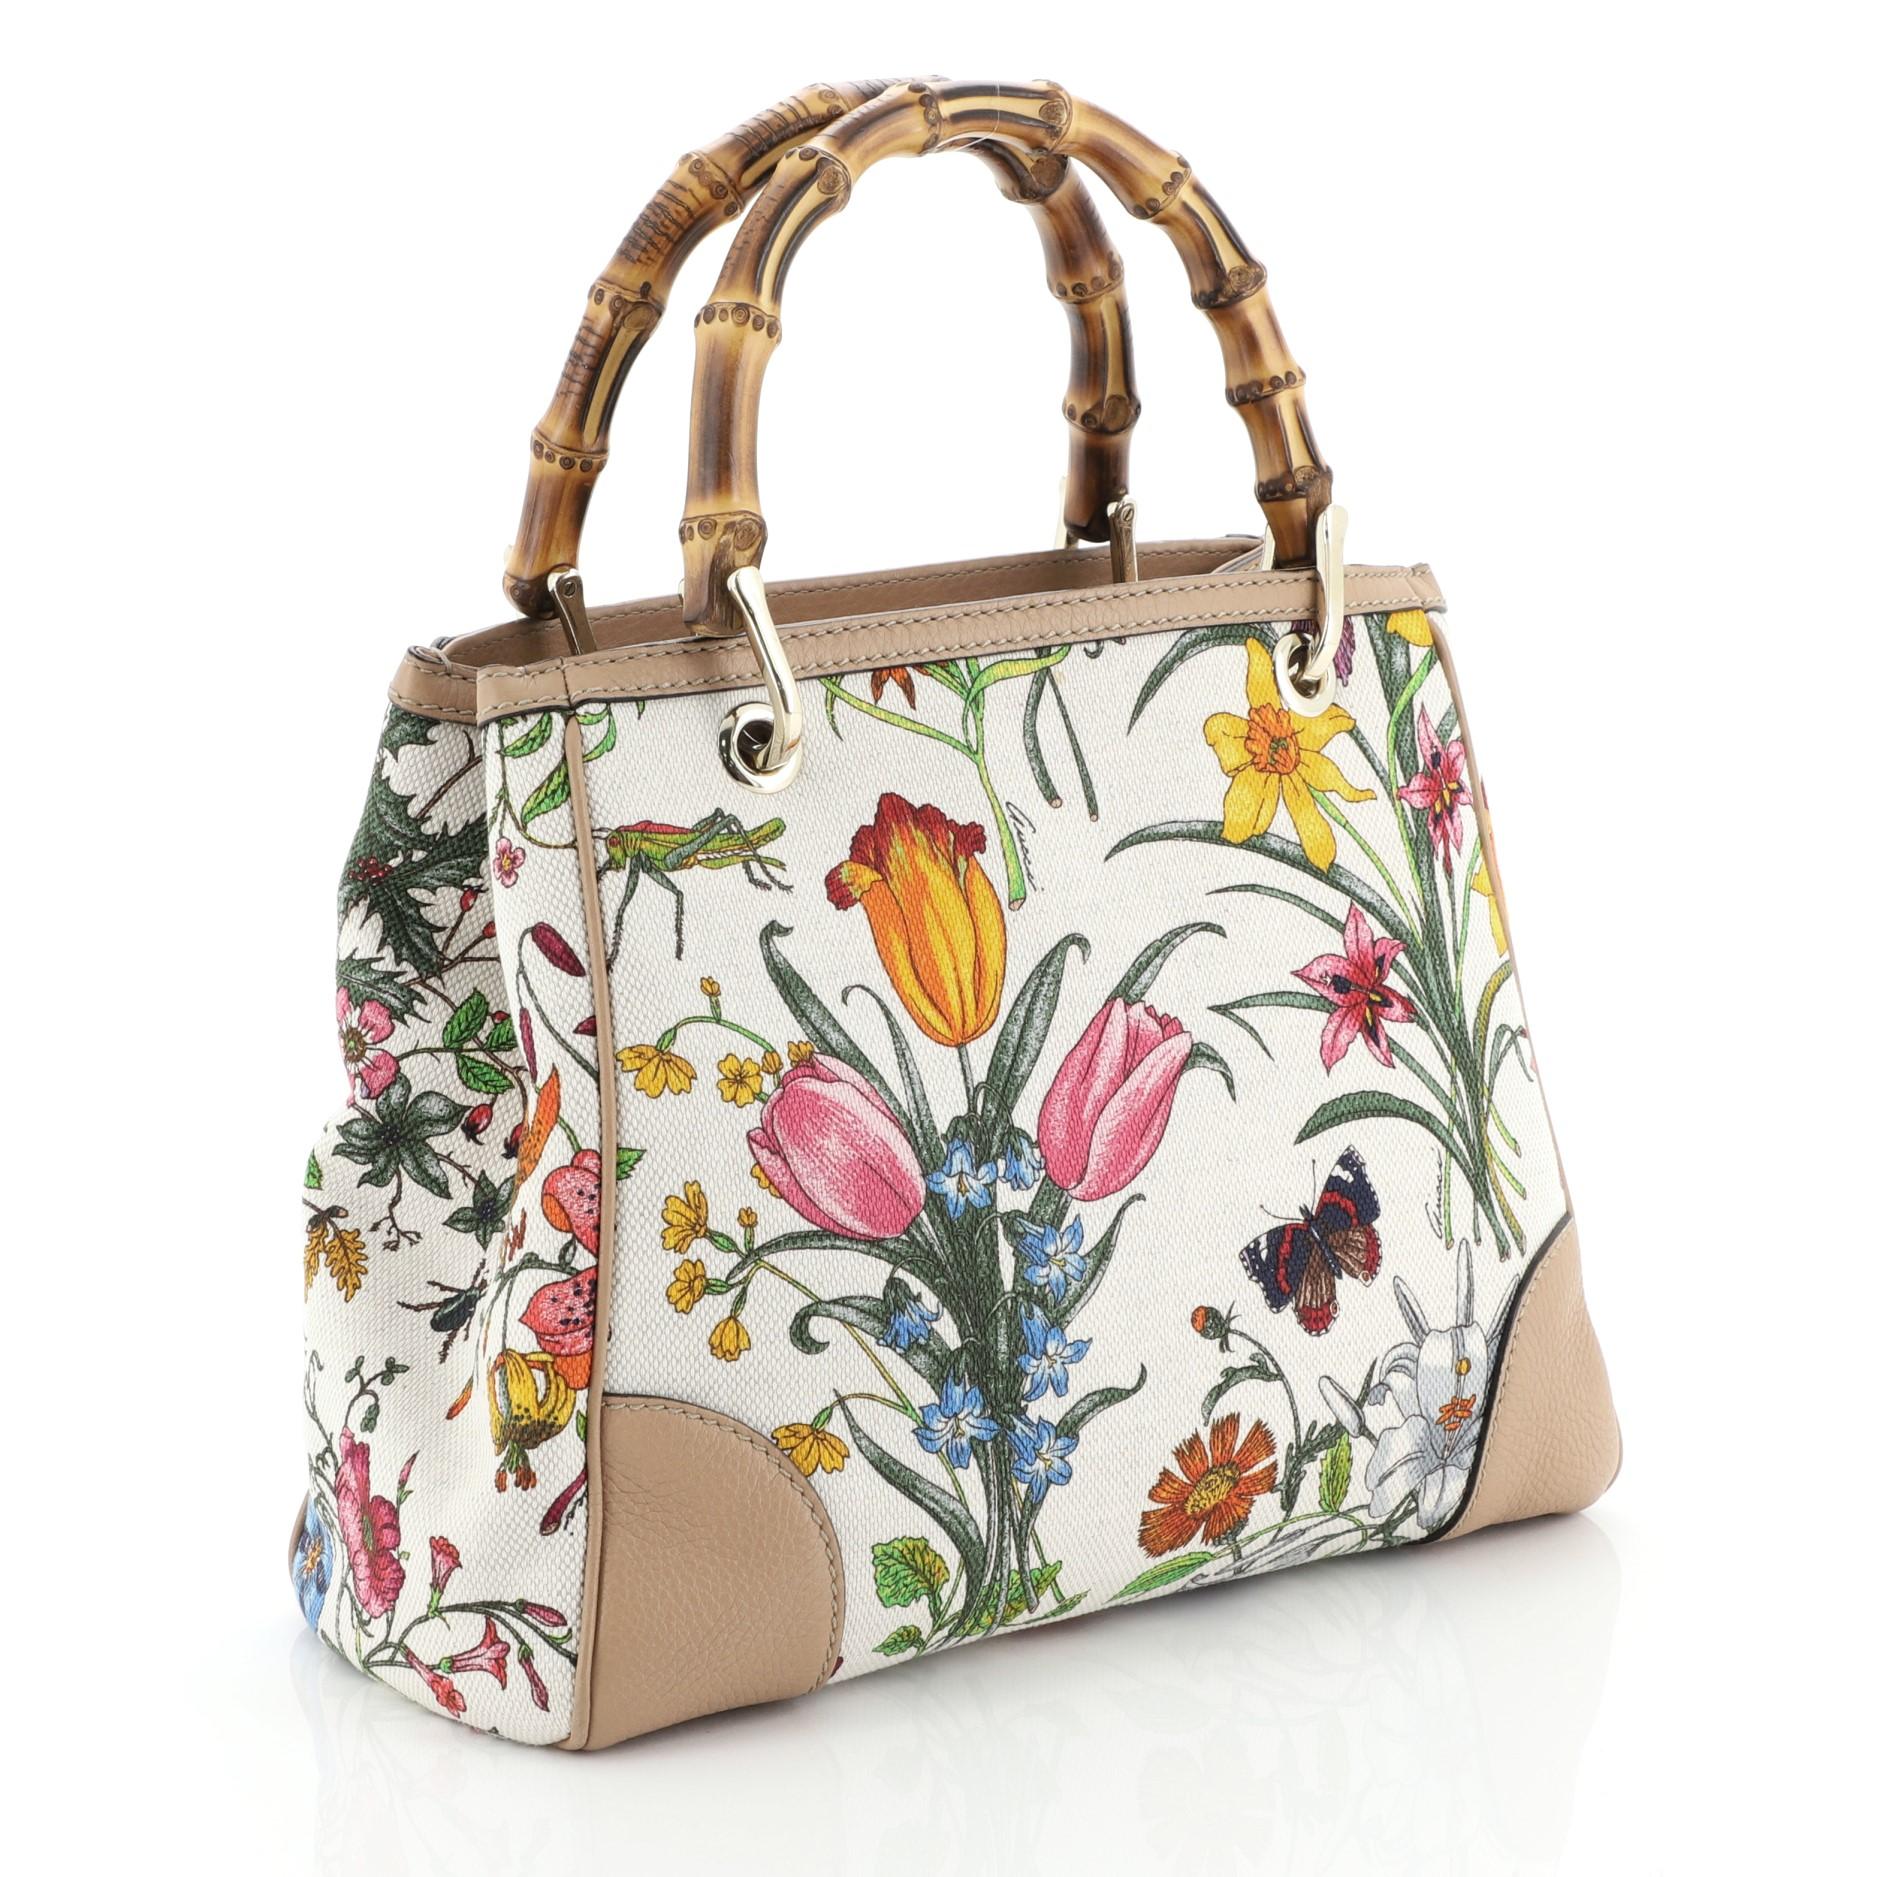 This Gucci Bamboo Shopper Tote Flora Canvas Small, crafted in white printed canvas, features dual bamboo handles and gold-tone hardware. Its hidden magnetic snap closure opens to a neutral fabric interior divided into two compartments with side zip